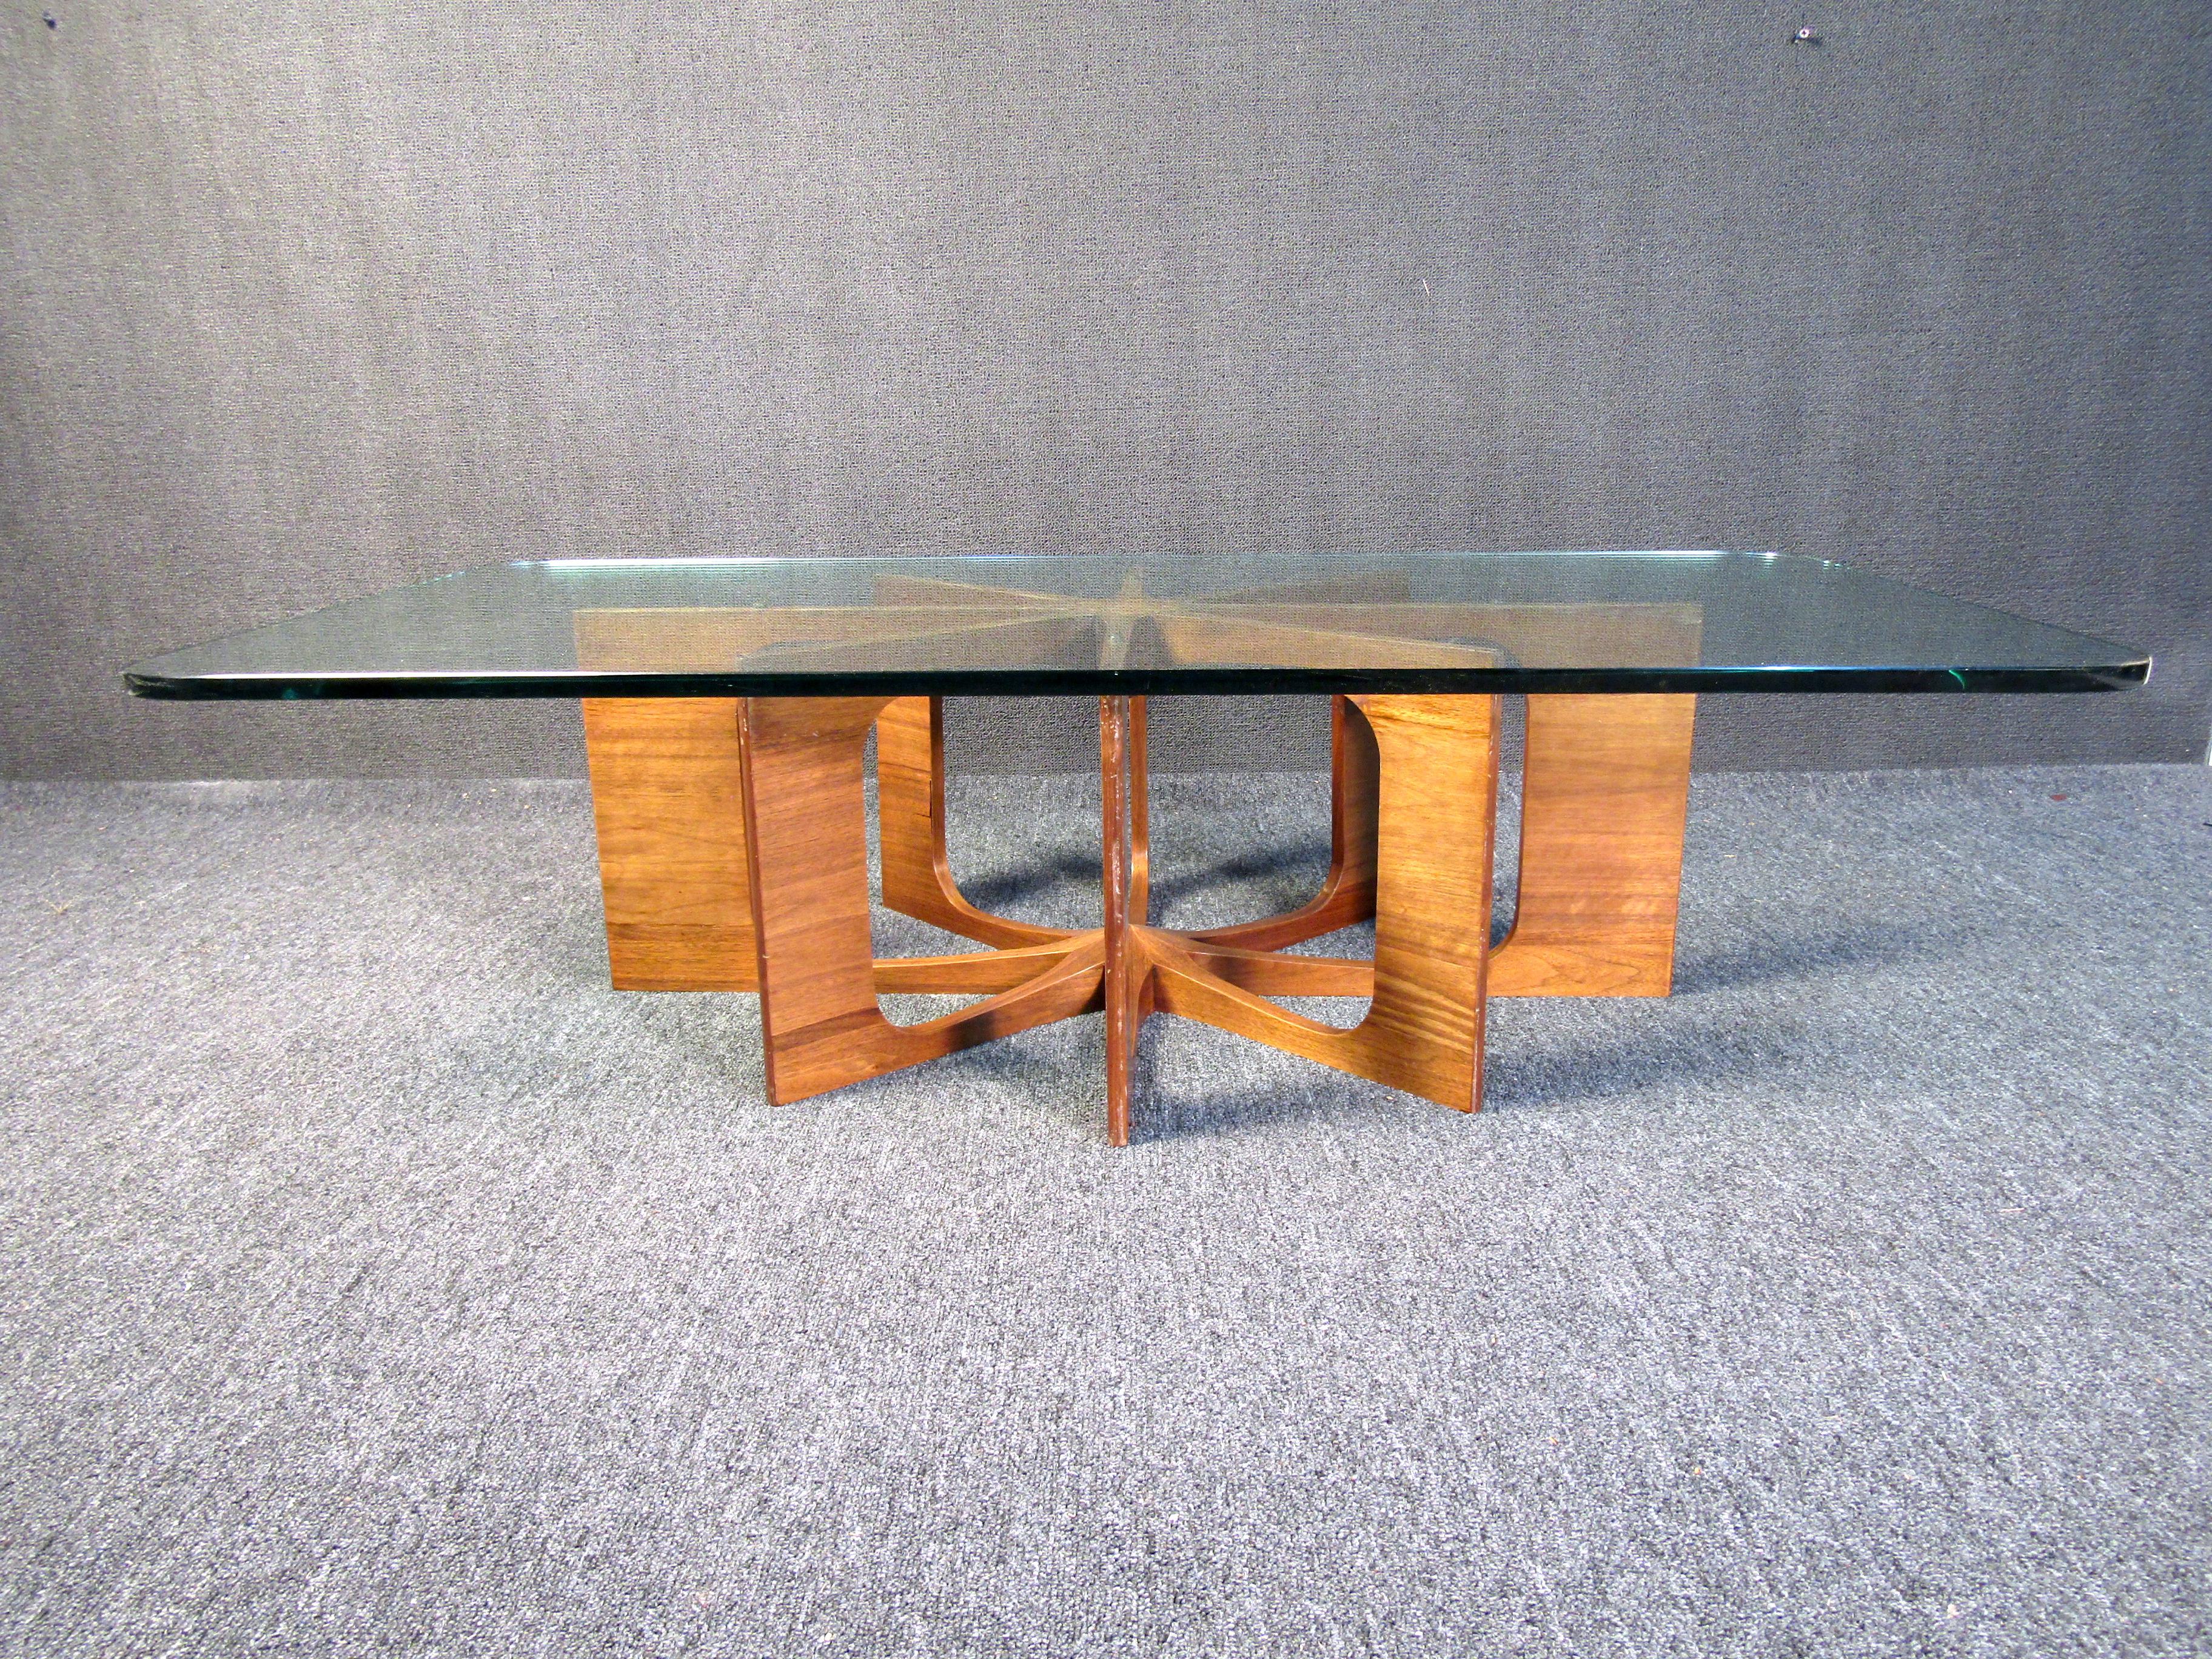 This beautiful designer coffee table shows off an elaborate walnut base through a clear glass top. Full of Mid-Century Modern style, this table is sure to attract attention in any living room or home. Please confirm the item location (NY or NJ).